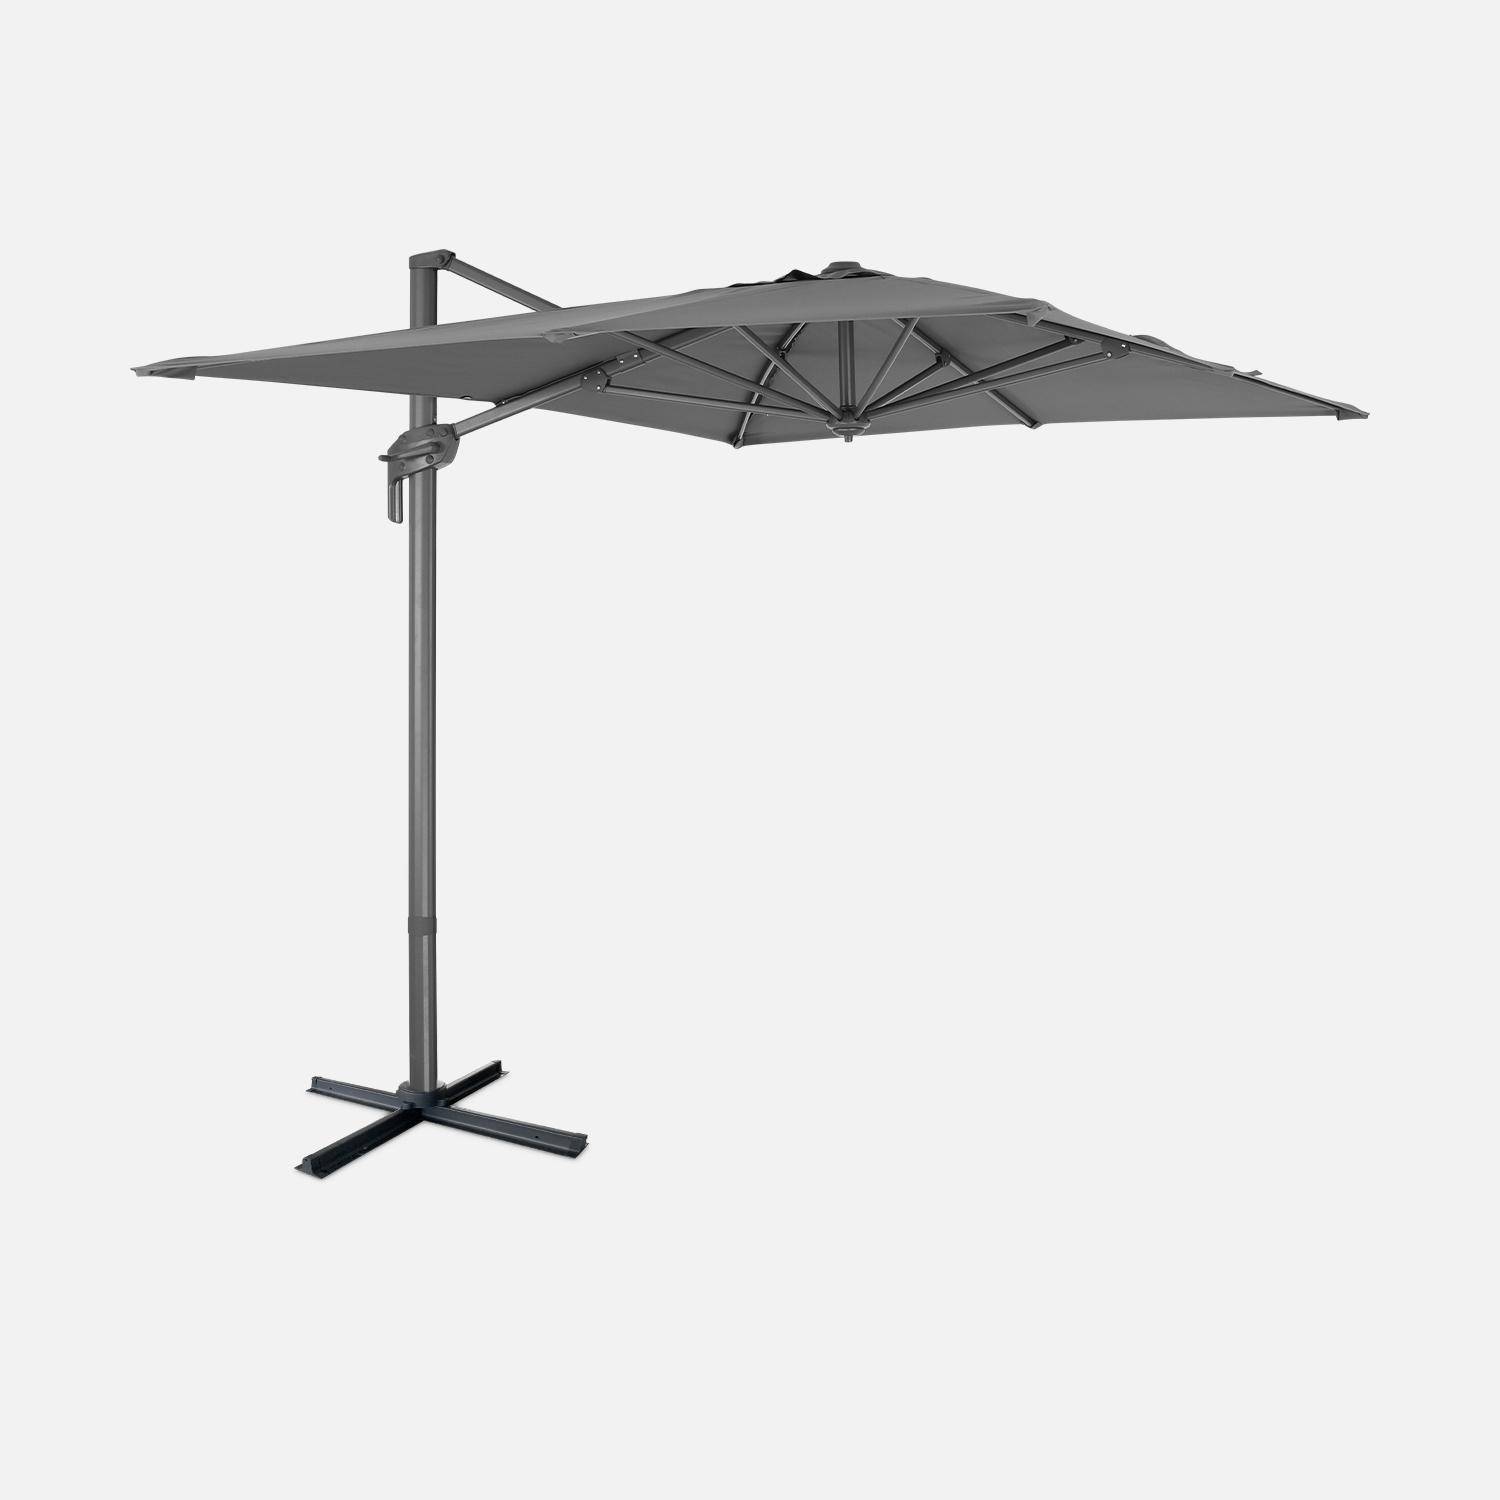 2x3m rectangular cantilever paraso - parasol can be tilted, folded and rotated 360 degreesl - Antibes - Grey Photo3